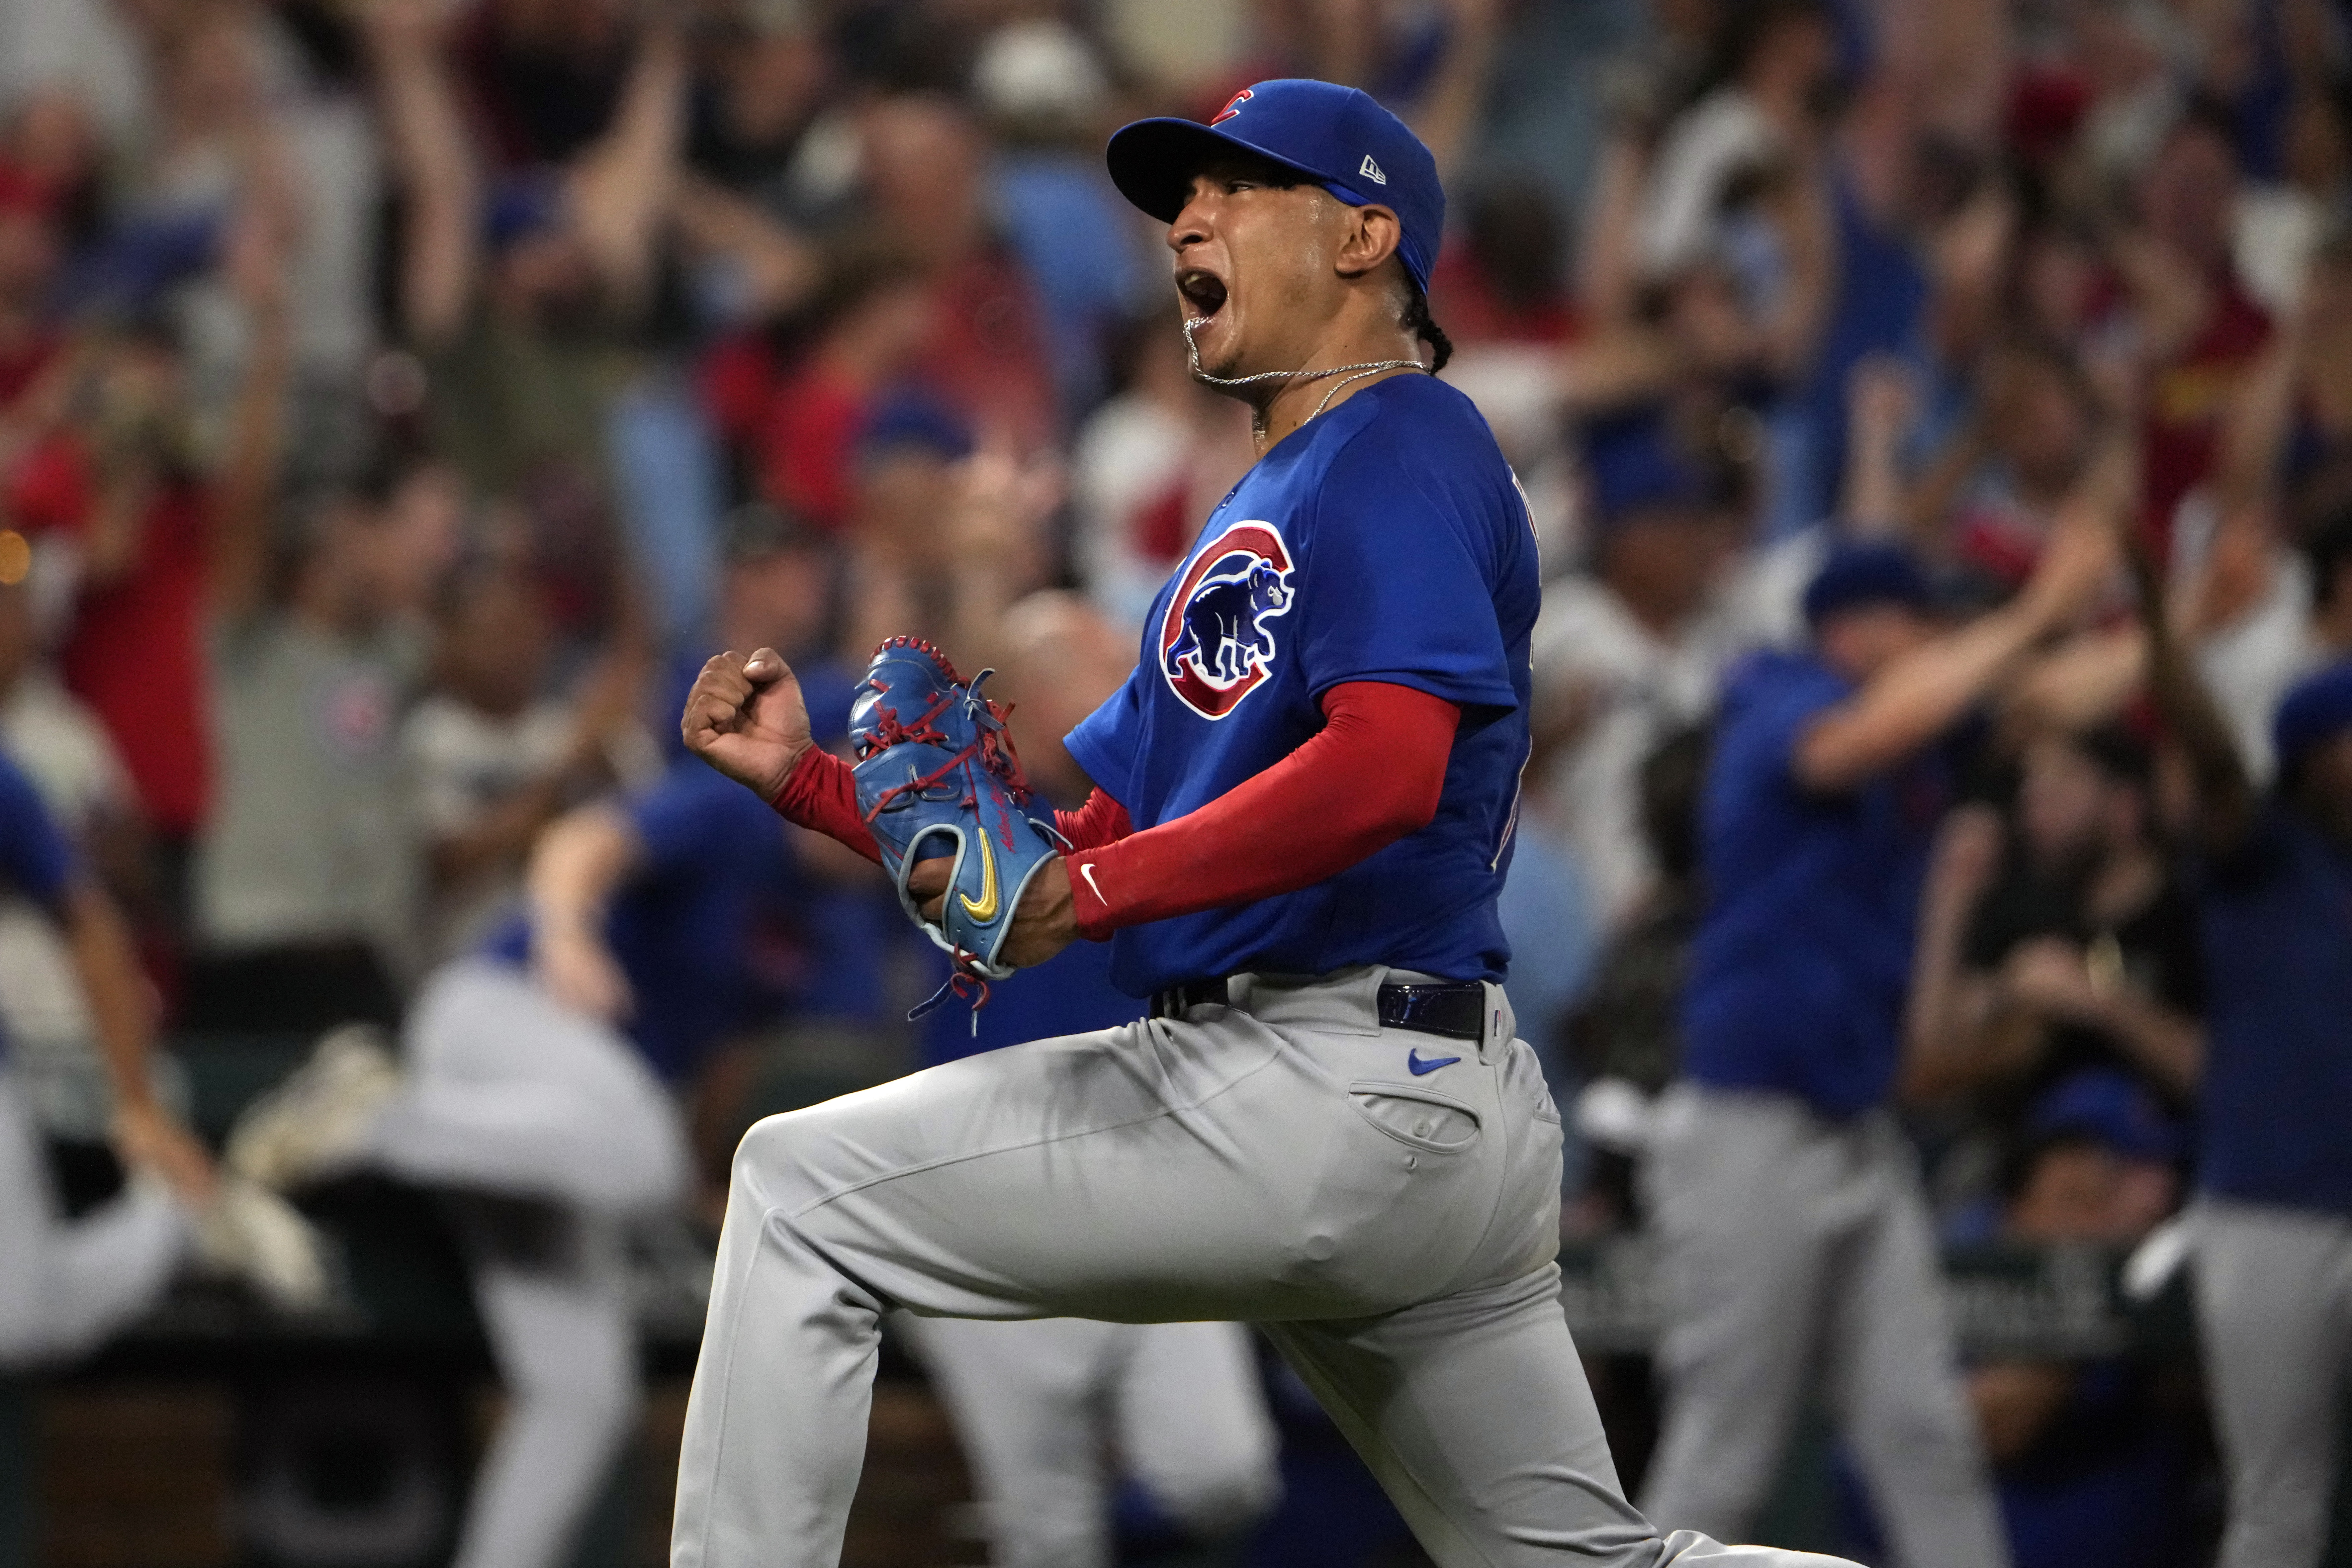 Cubs: It's all going to depend on these four to get hot early